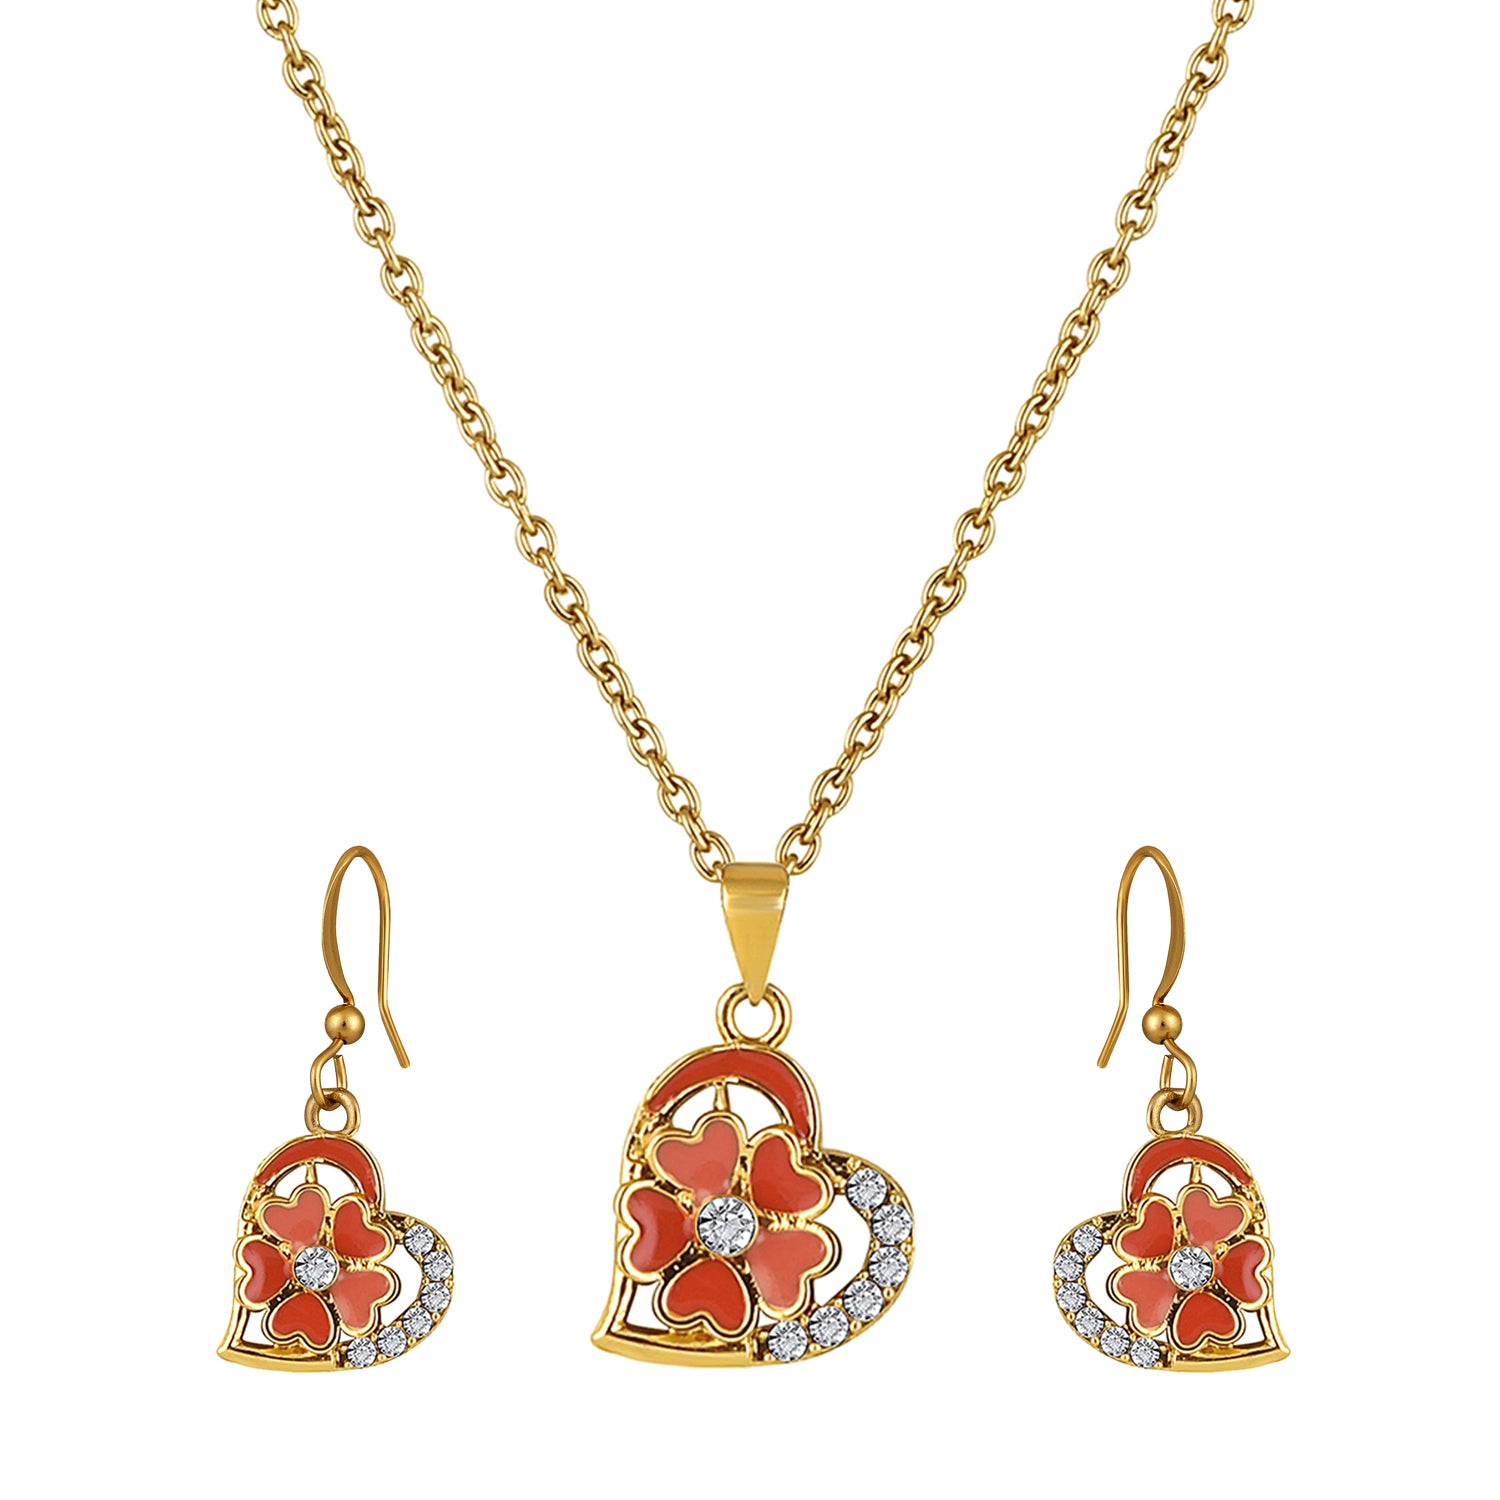 Red and Pink Meenakari Work and Crystals Floral Heart Pendant Set